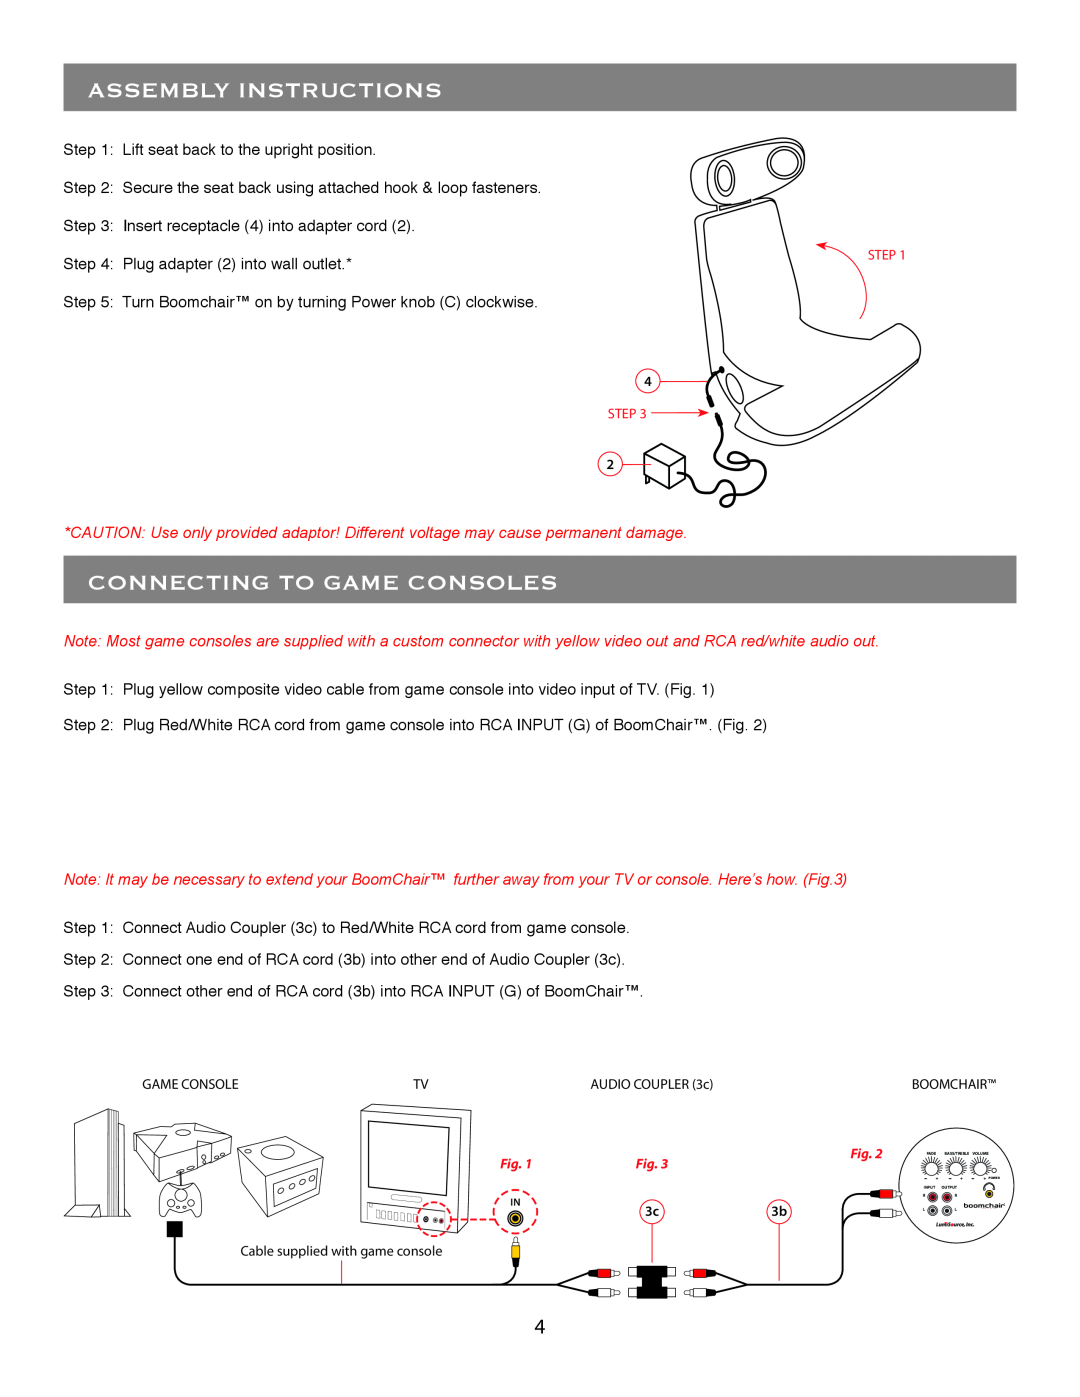 LumiSource 4.1 owner manual Assembly Instructions, Connecting To Game Consoles 